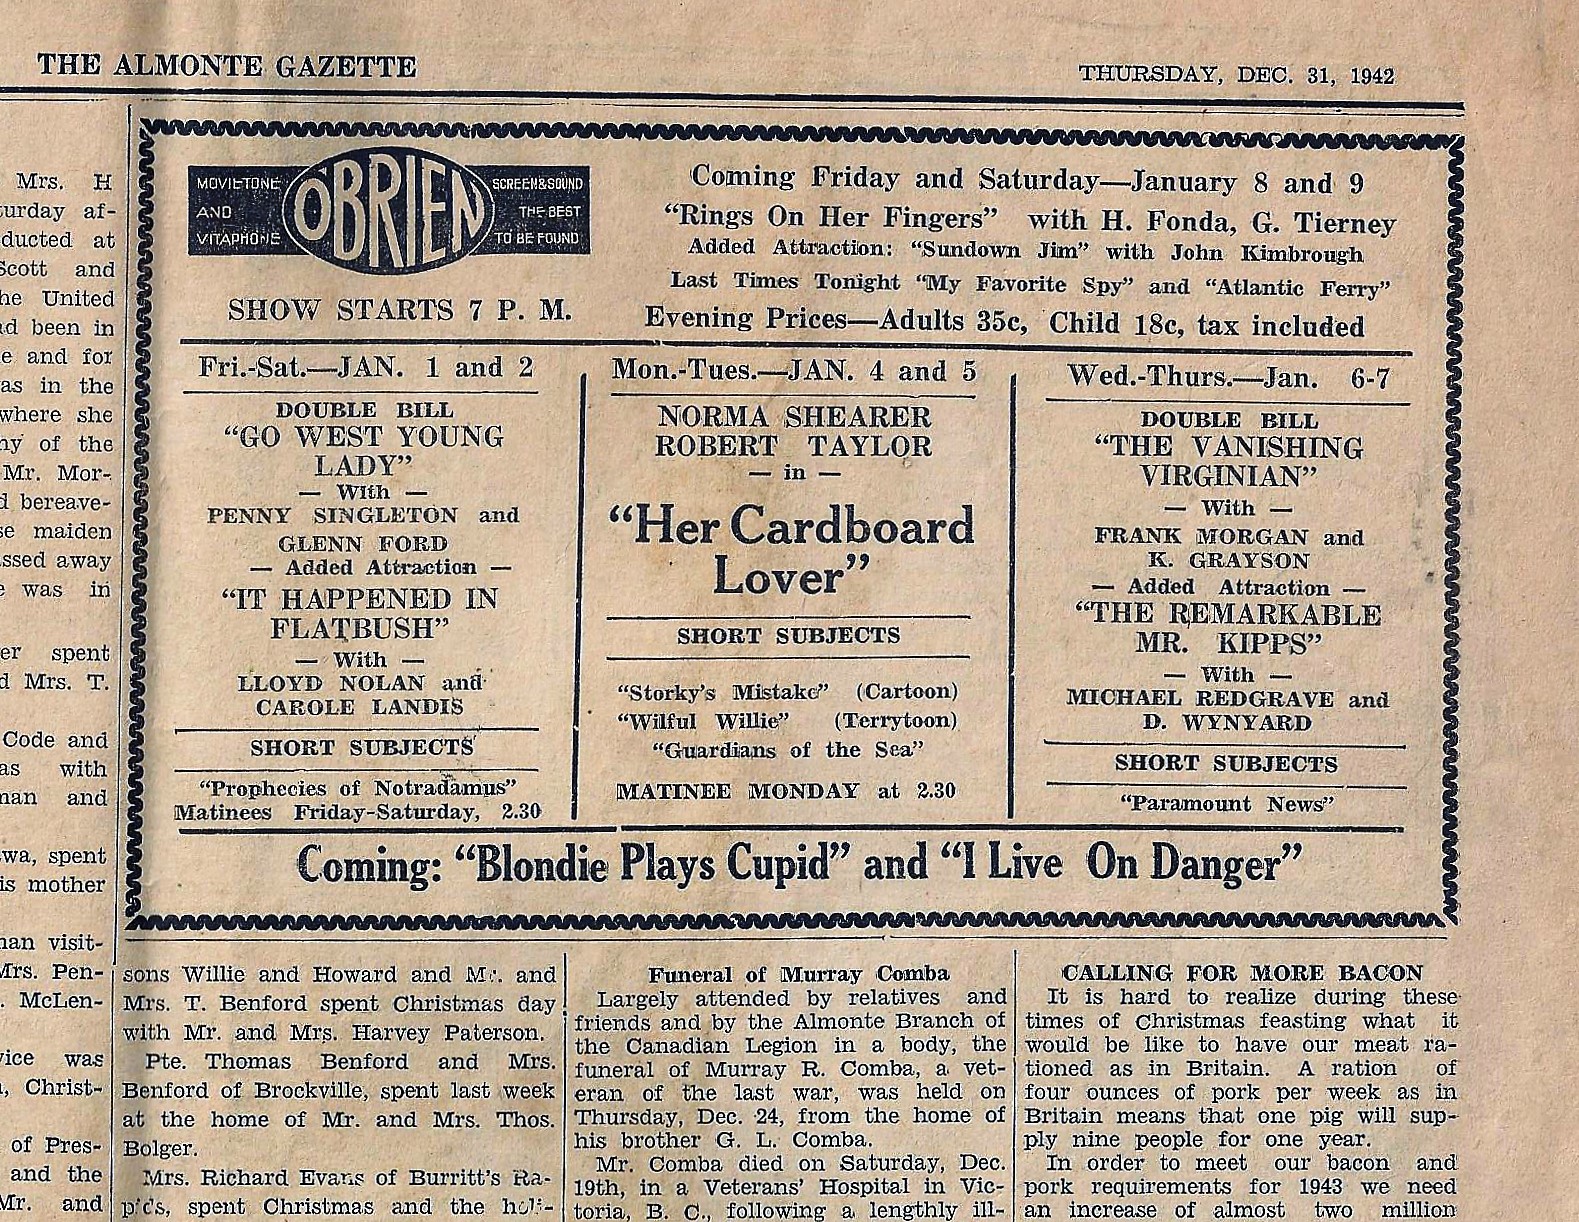 Newspaper clipping of an advertisement for the O'Brien Theatre from the Almonte Gazette on December 31, 1942